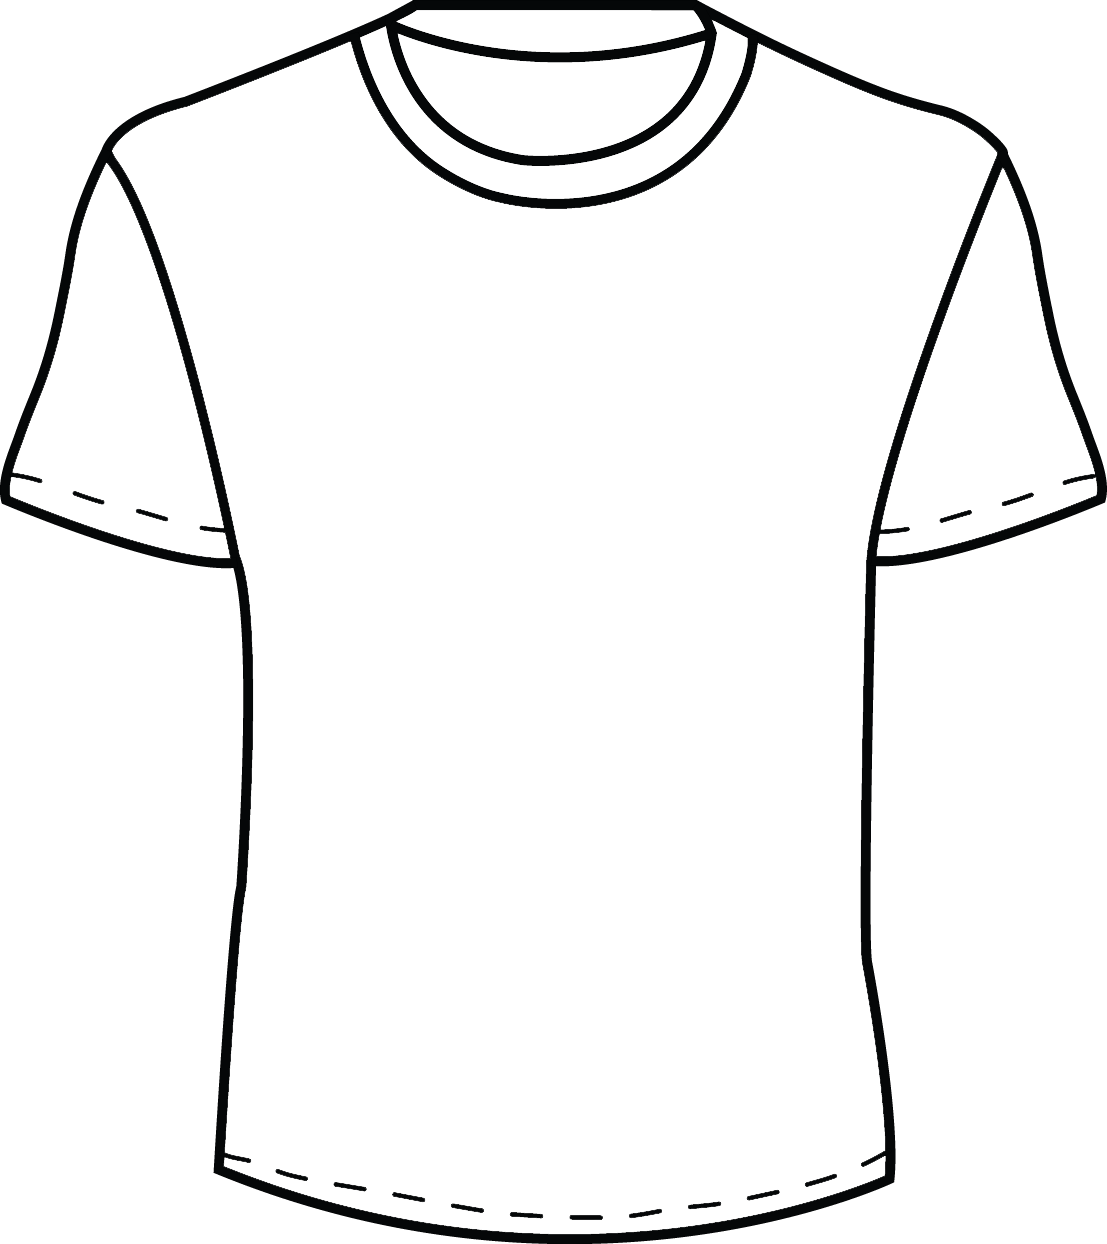 Blank T-shirt colouring pages (page 2)